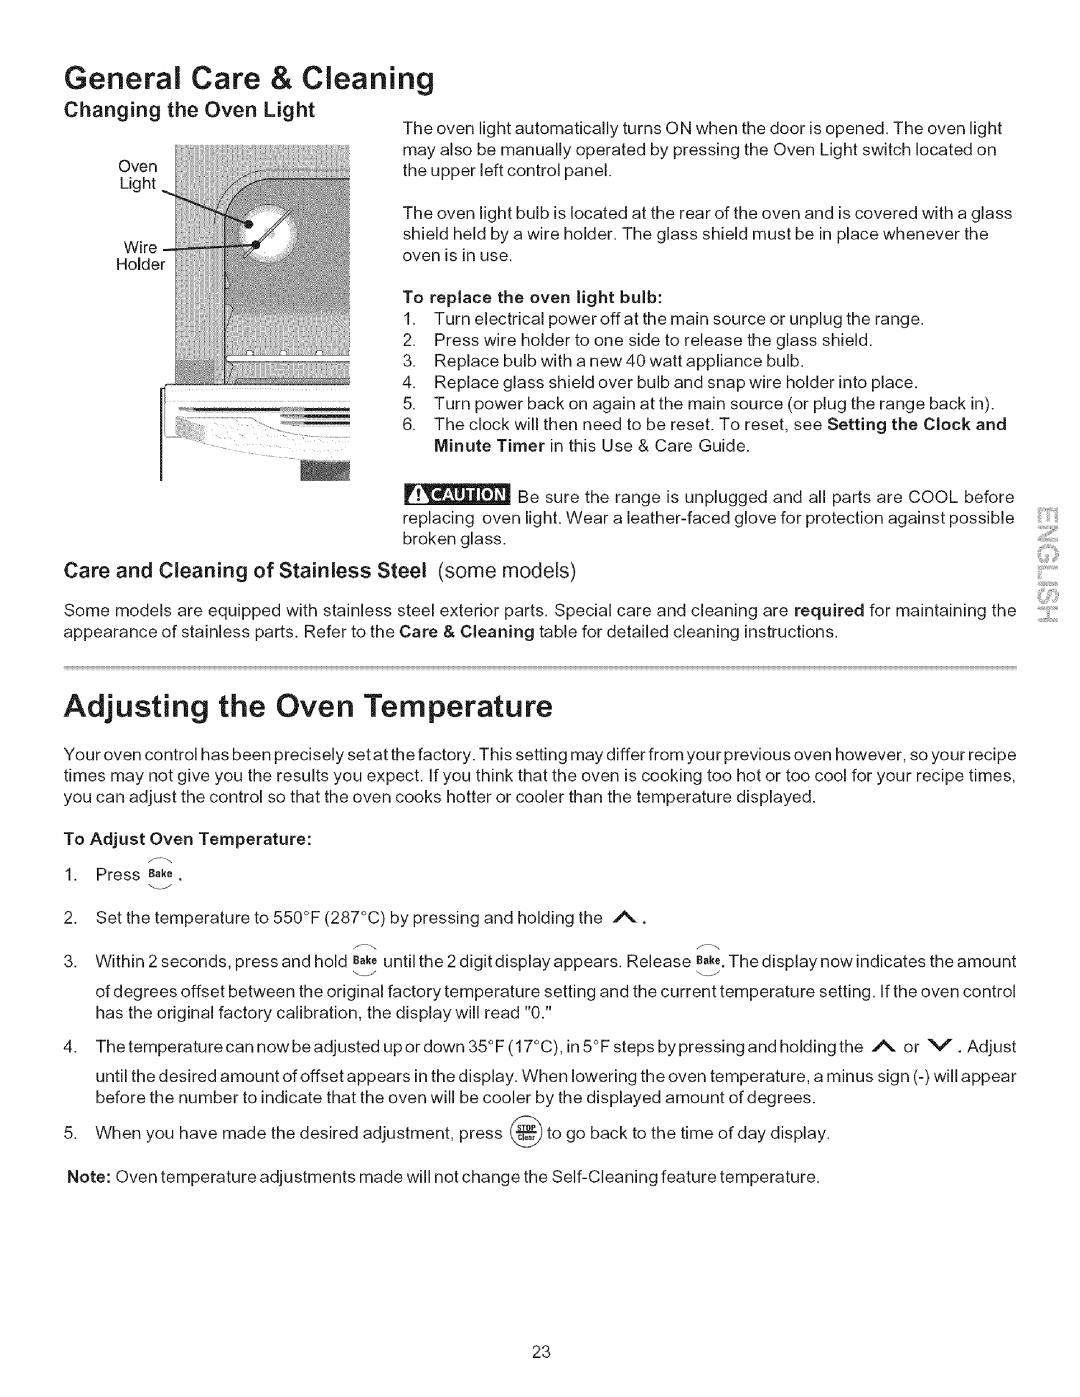 Kenmore 790.9403, 790.9402 manual General Care & Cleani, i !i, Adjusting the Oven Temperature, Changing the Oven Light 